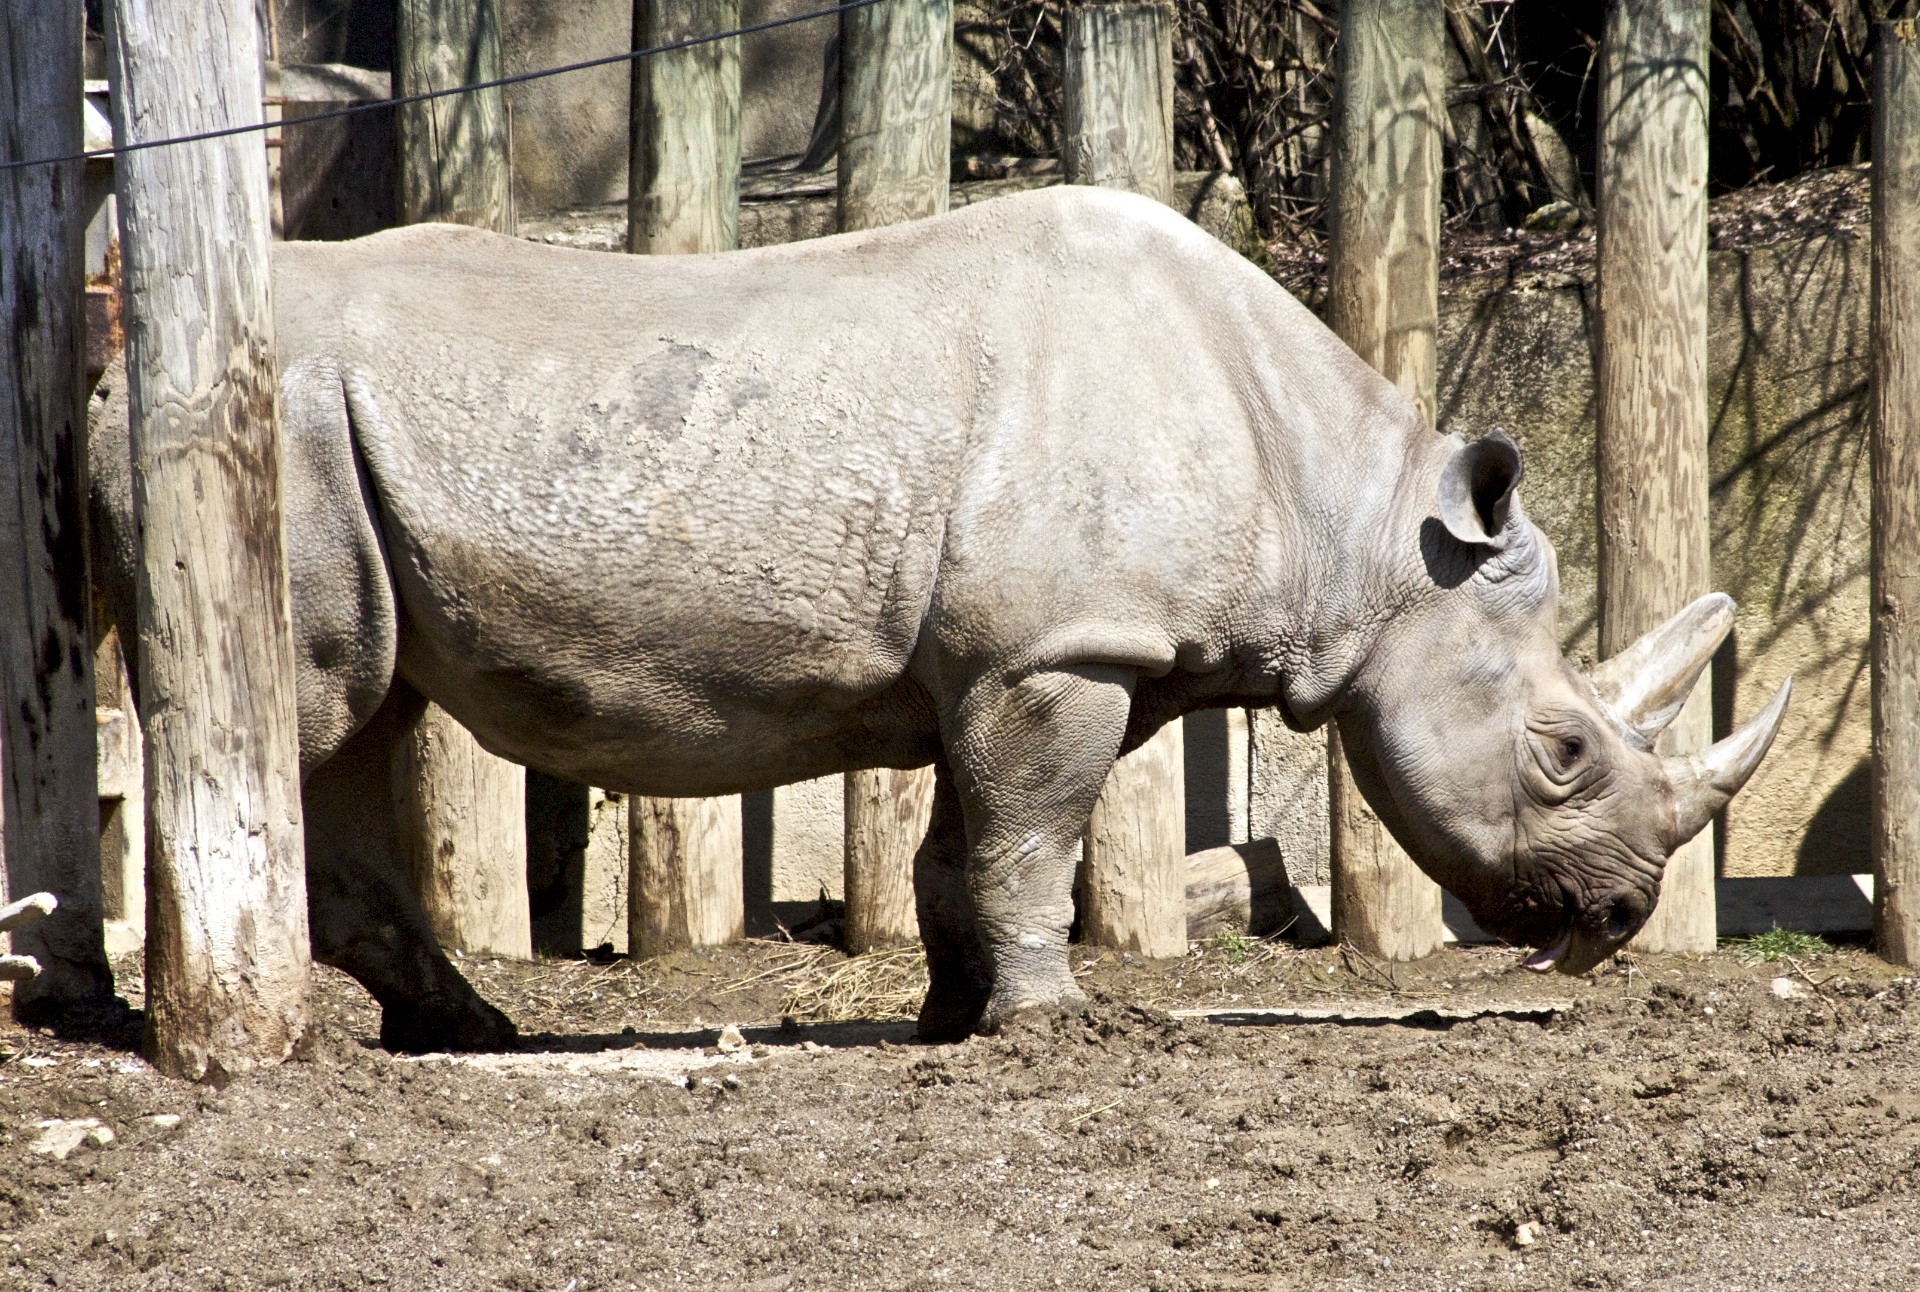 the rhino is standing in his pen and eating some dirt